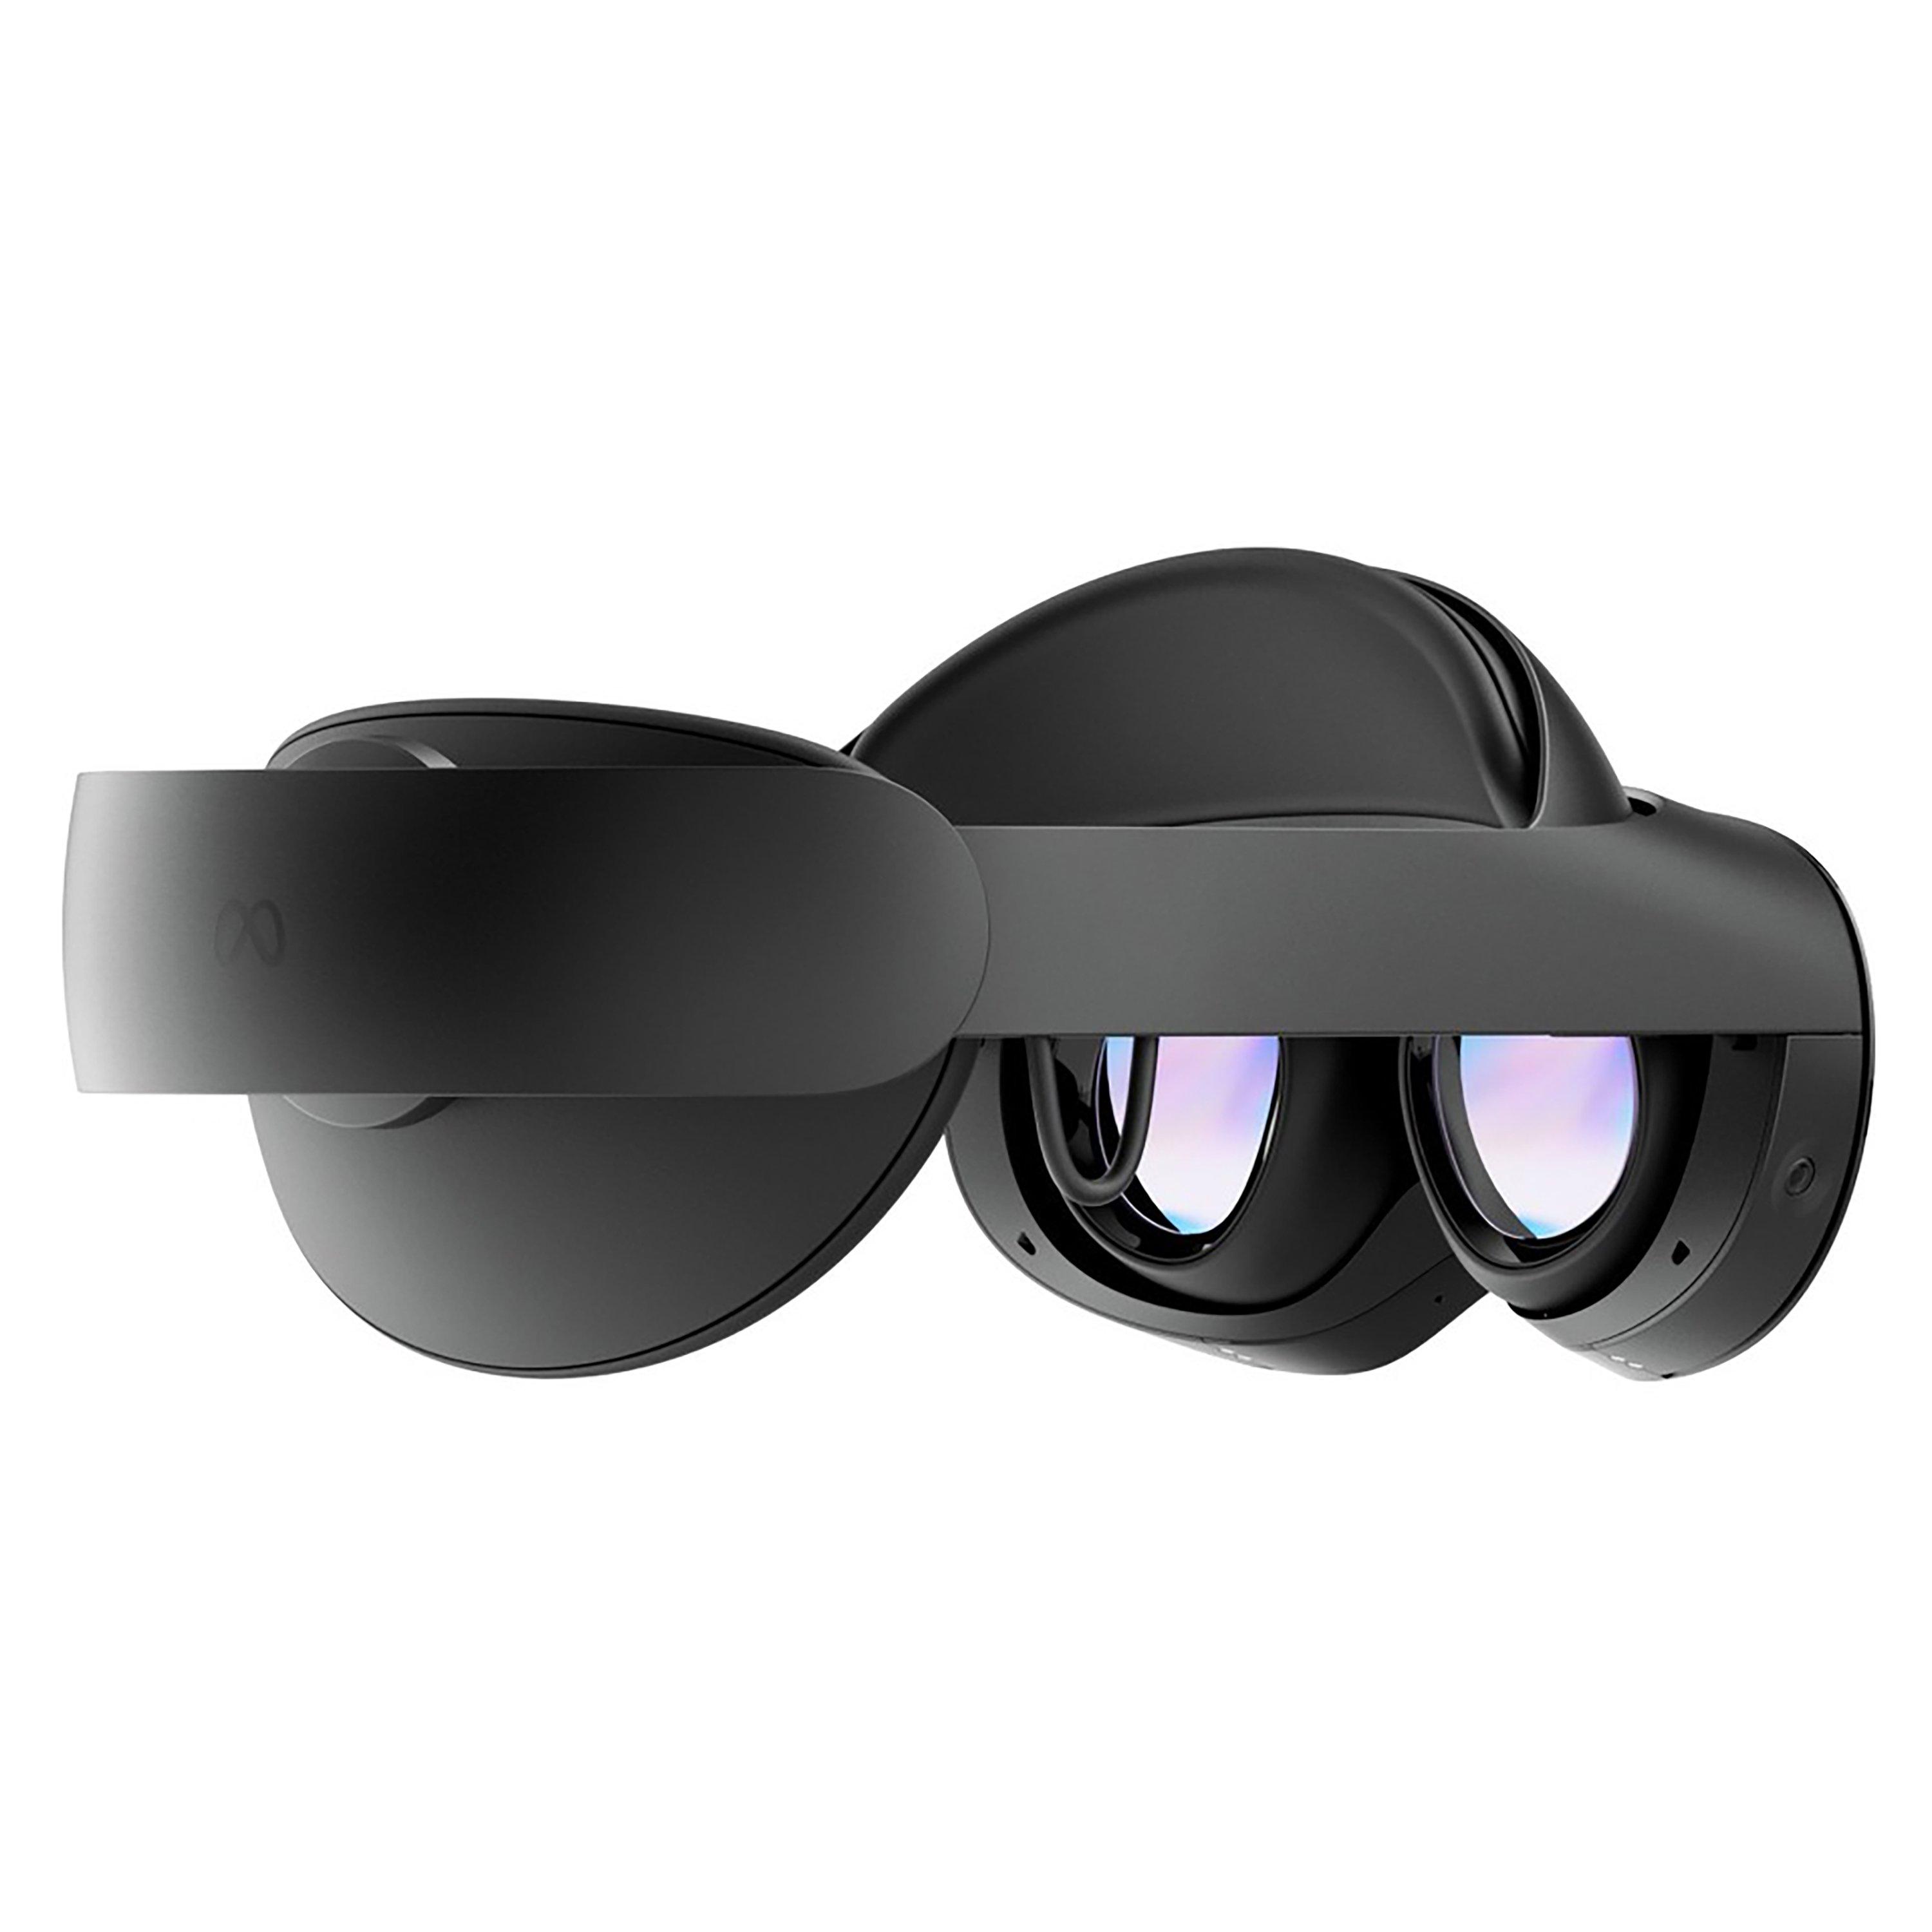 Best Black Friday VR Headset Deals 2023: Early Sony PlayStation VR, Oculus  Meta Quest 2, Meta Quest 3 & More Best Buy & Walmart VR Headset Savings  Researched by Saver Trends